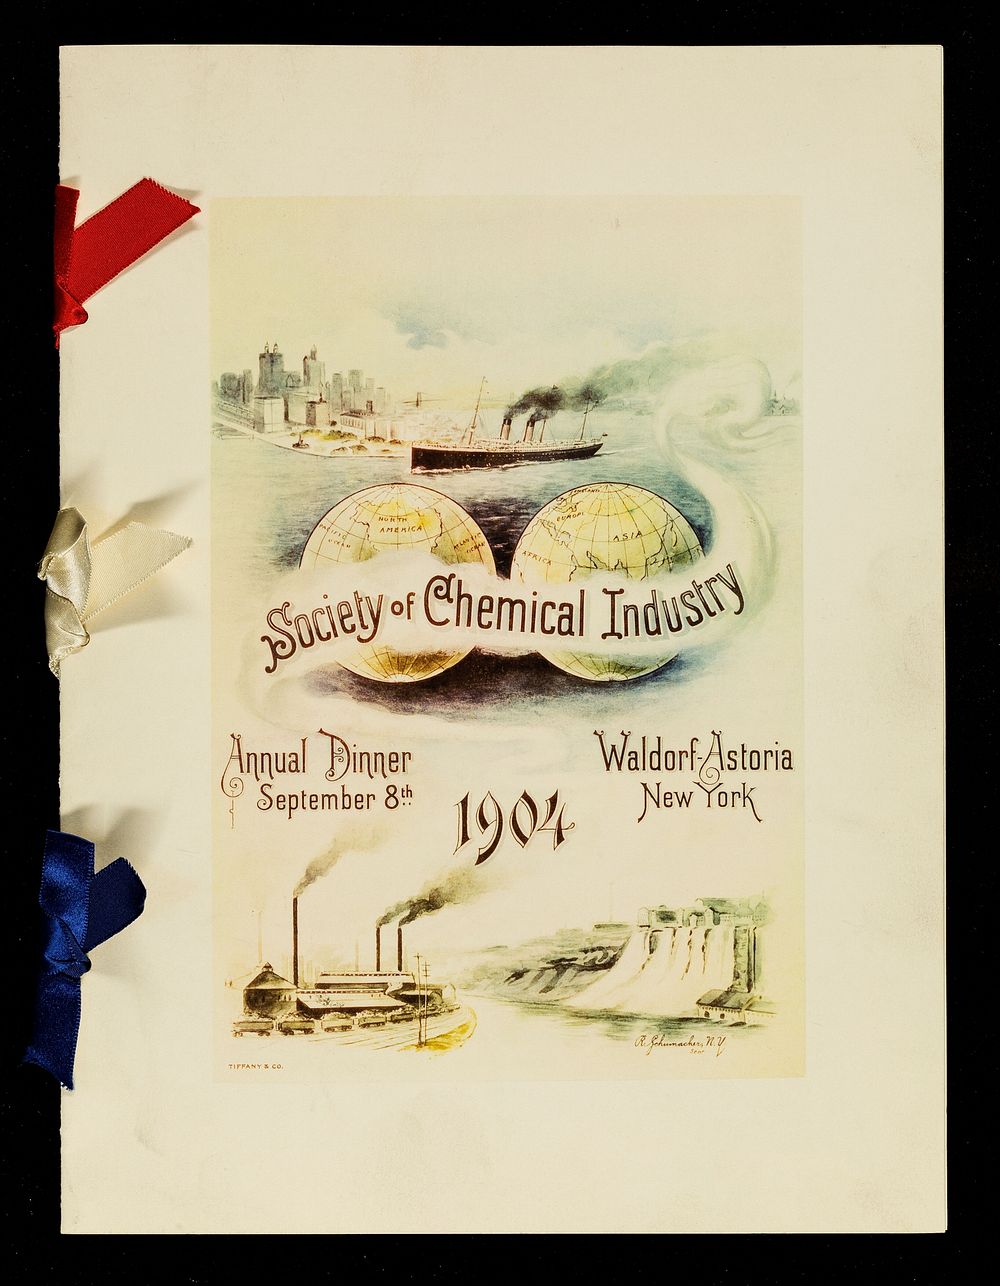 Annual dinner : September 8th 1904, Waldorf-Astoria, New York / Society of Chemical Industry.